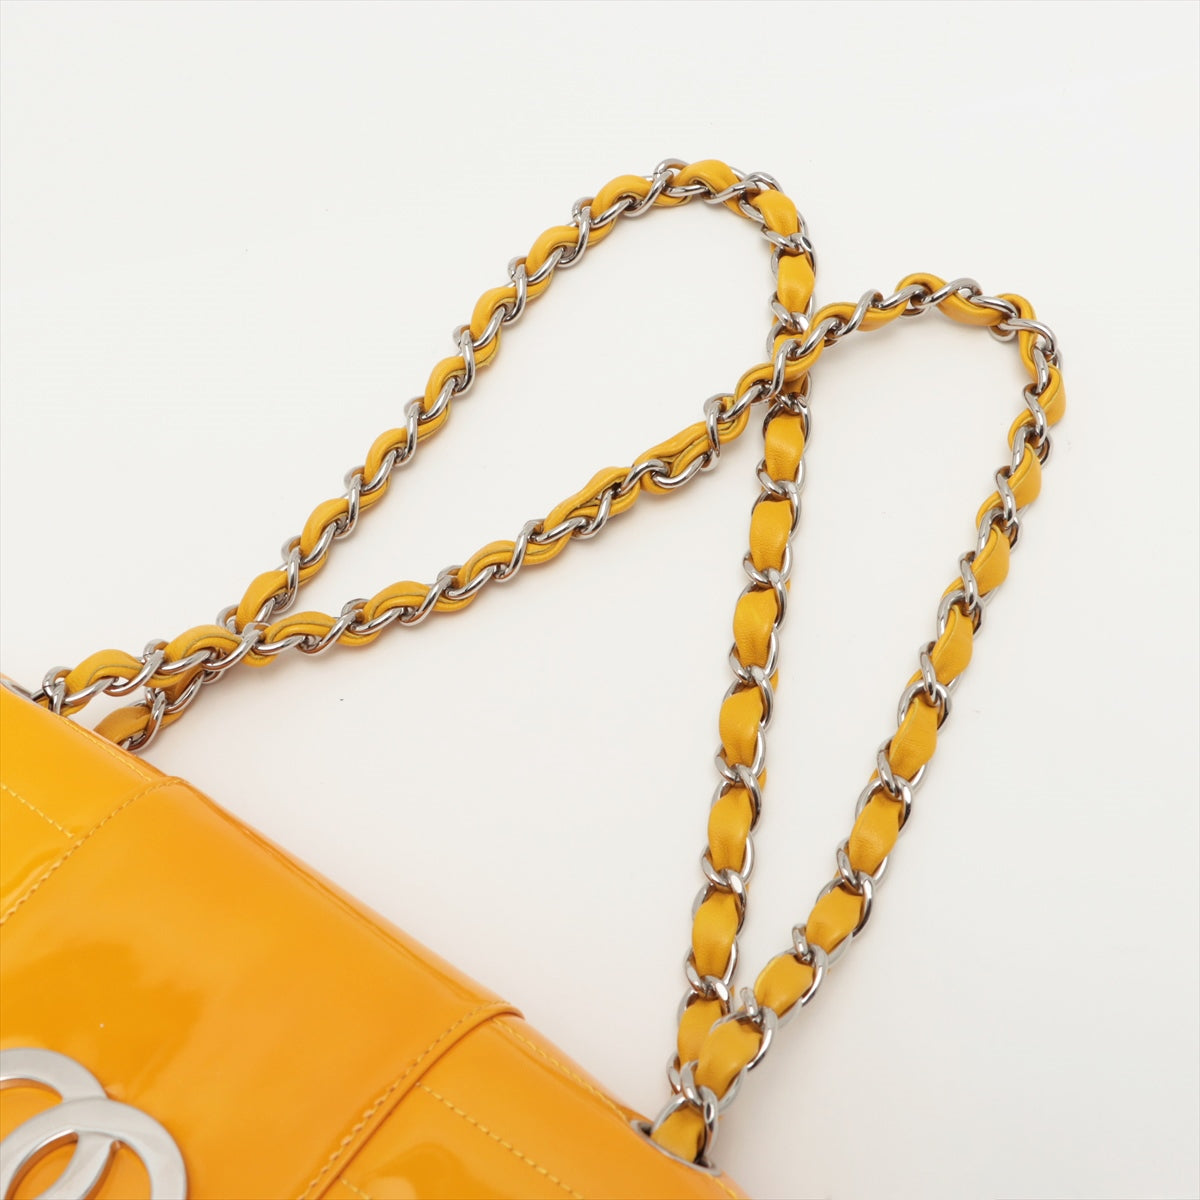 Chanel Coco Mark Patent leather Single flap Double chain bag Yellow Silver Metal fittings 10XXXXXX